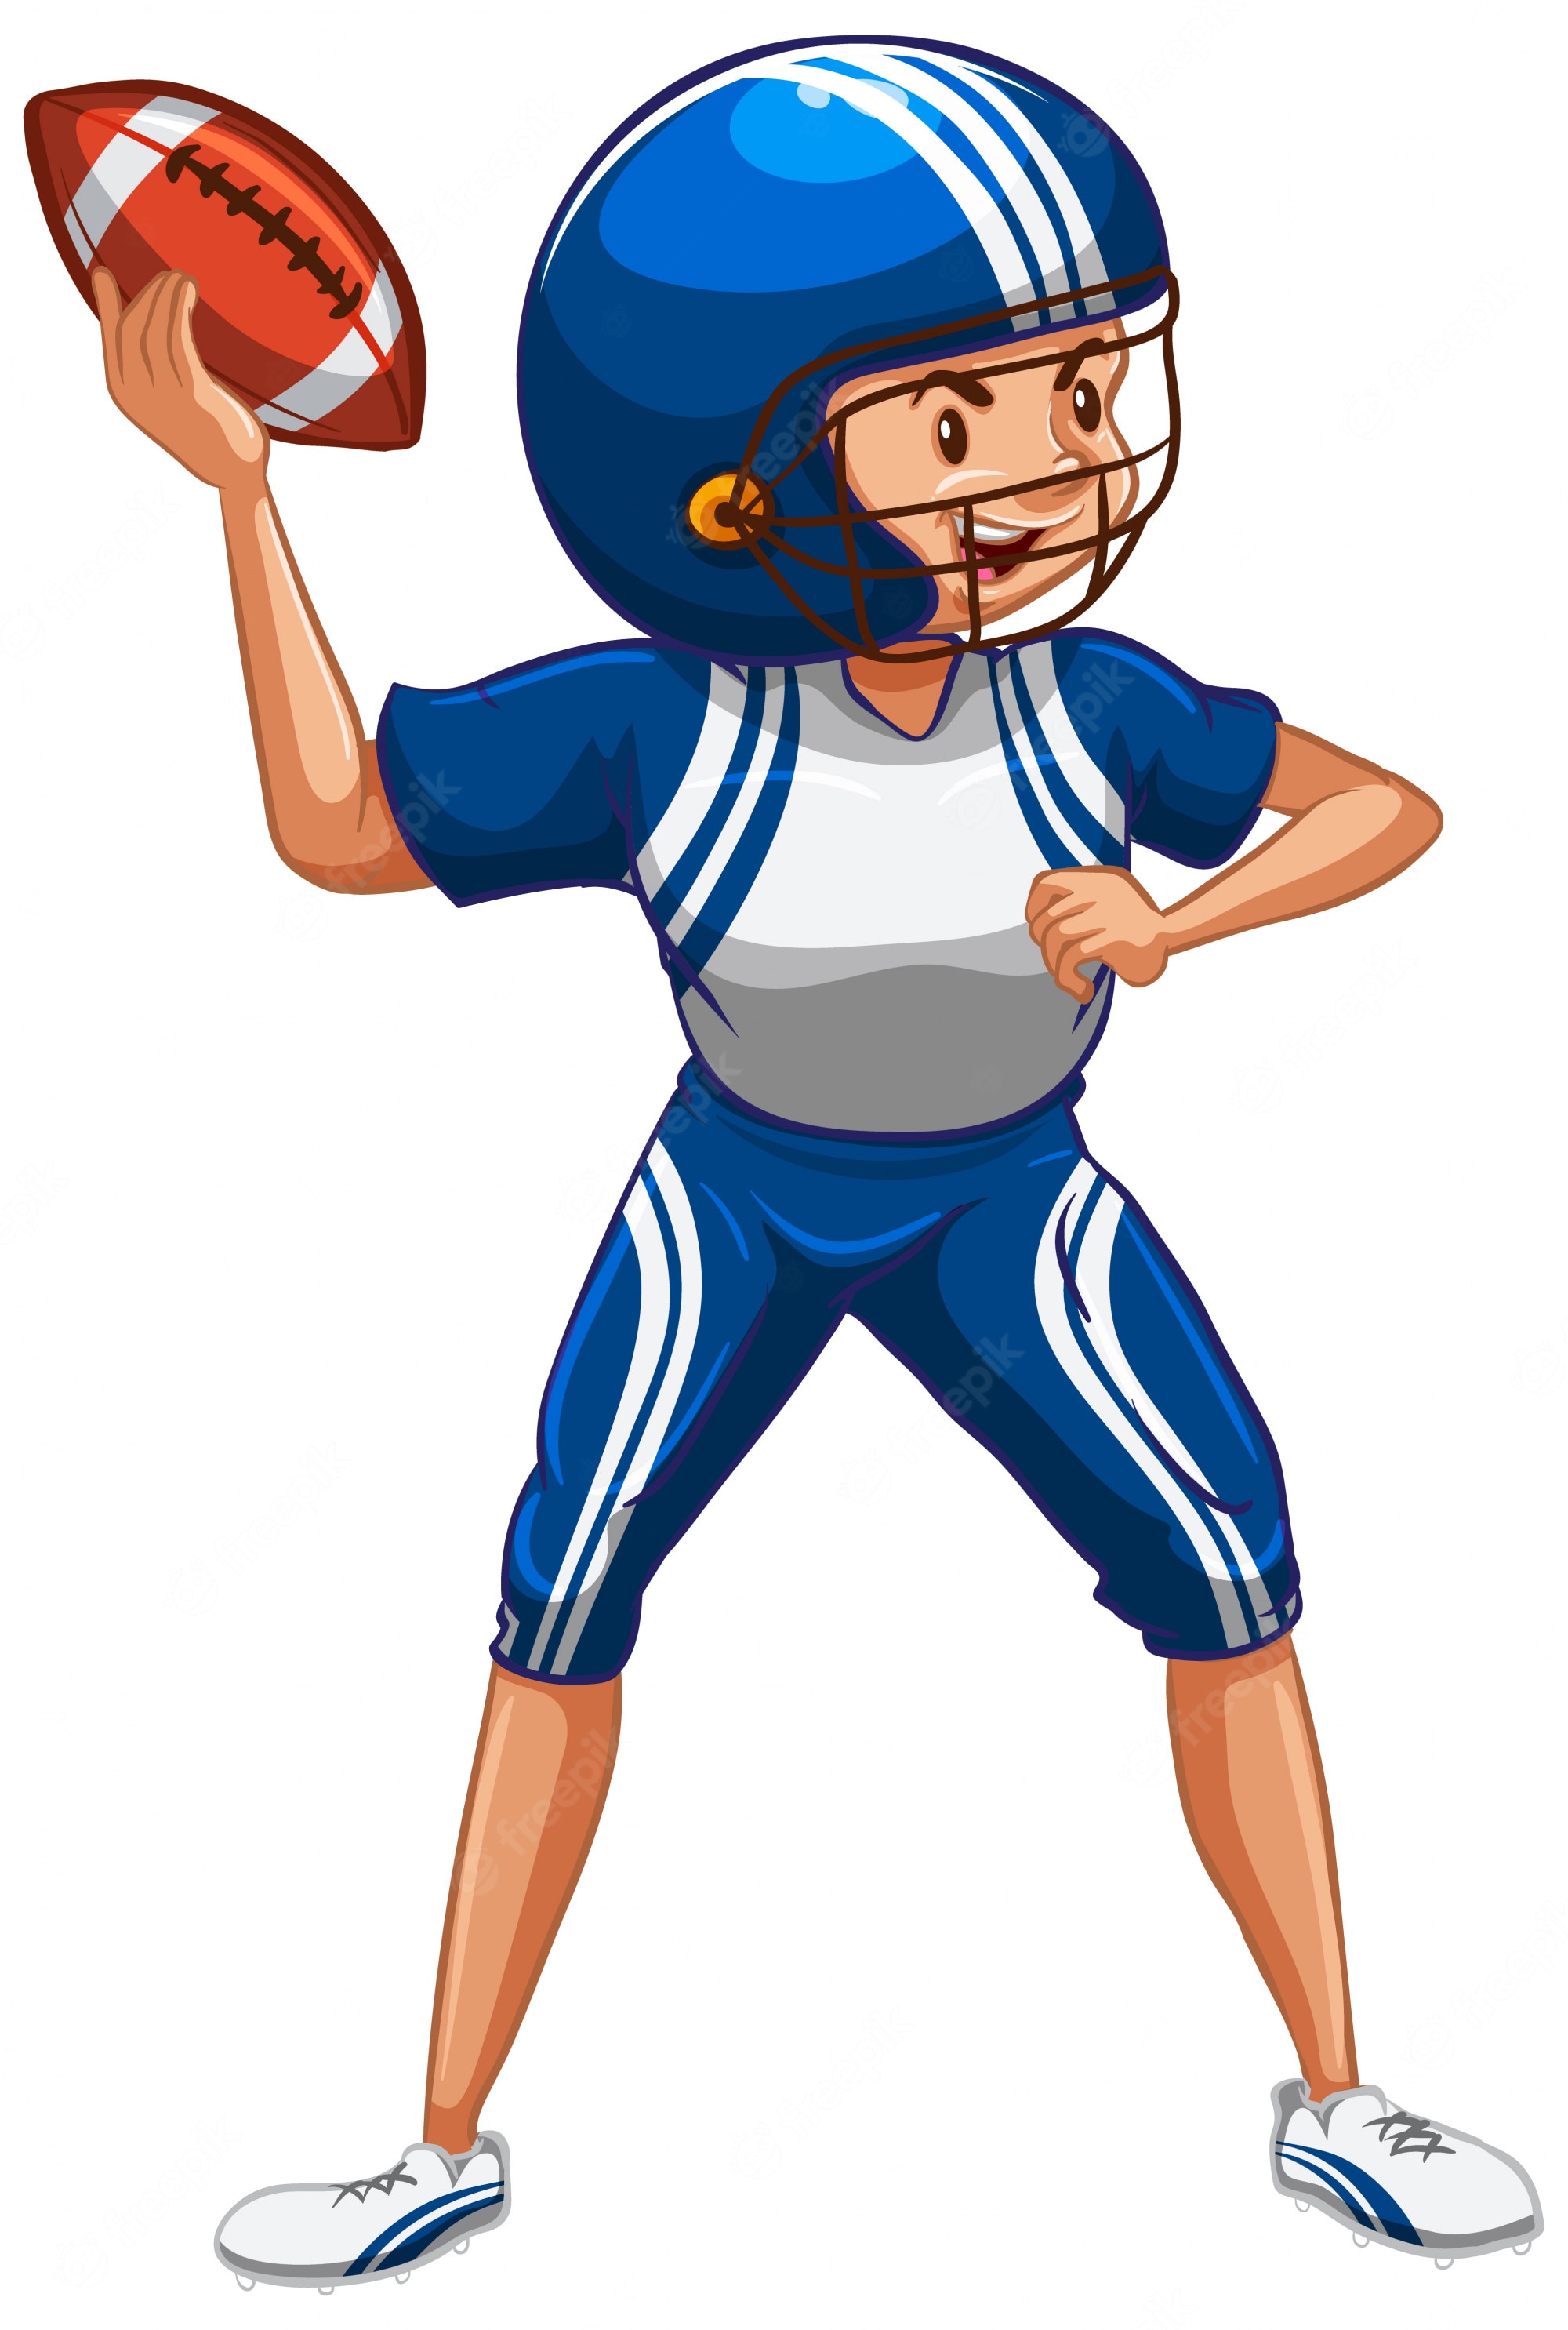 American Football Player Clip Art Images - Free Download on Clipart ...